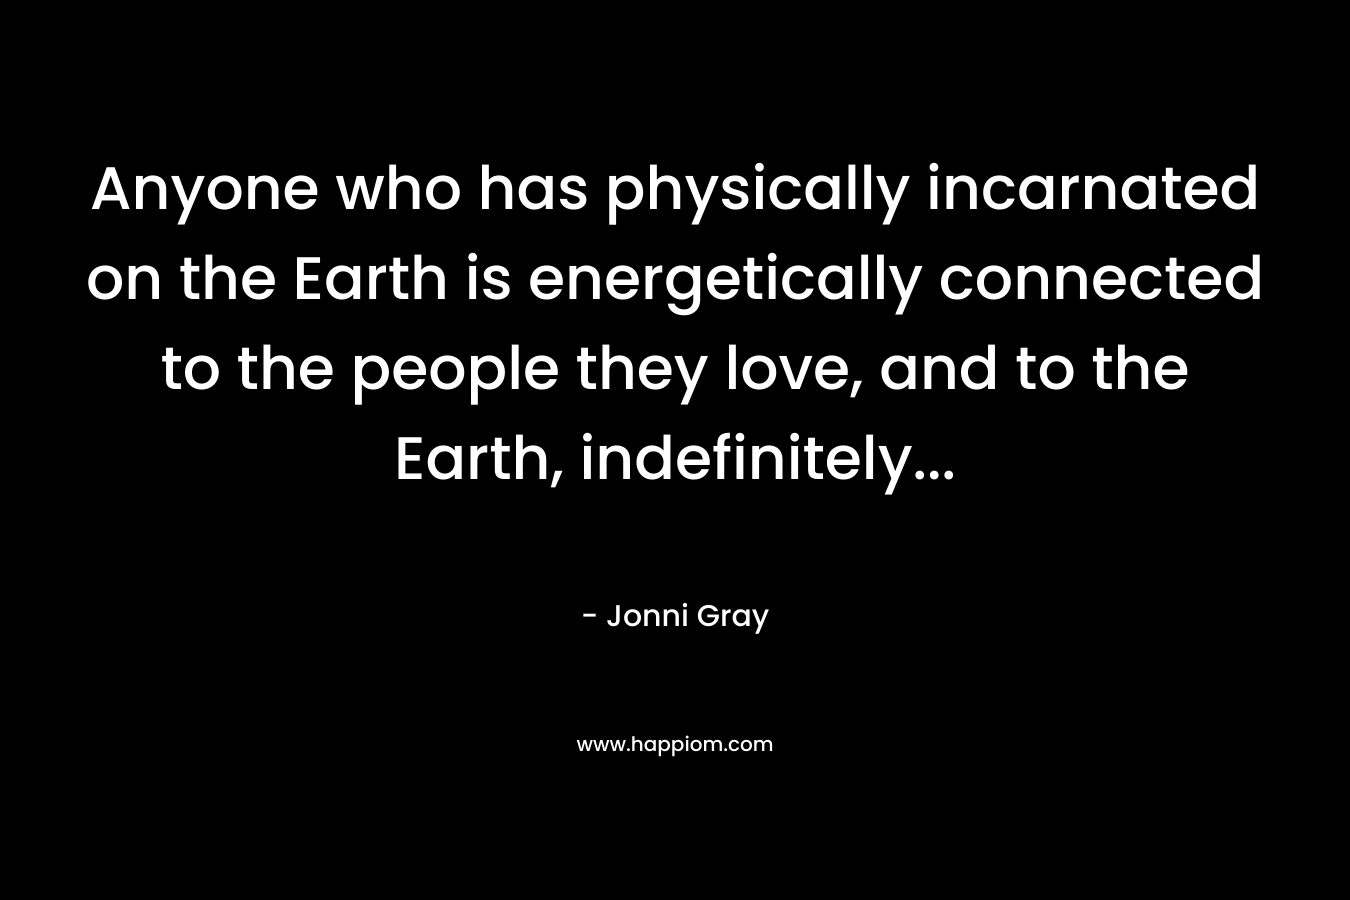 Anyone who has physically incarnated on the Earth is energetically connected to the people they love, and to the Earth, indefinitely… – Jonni Gray